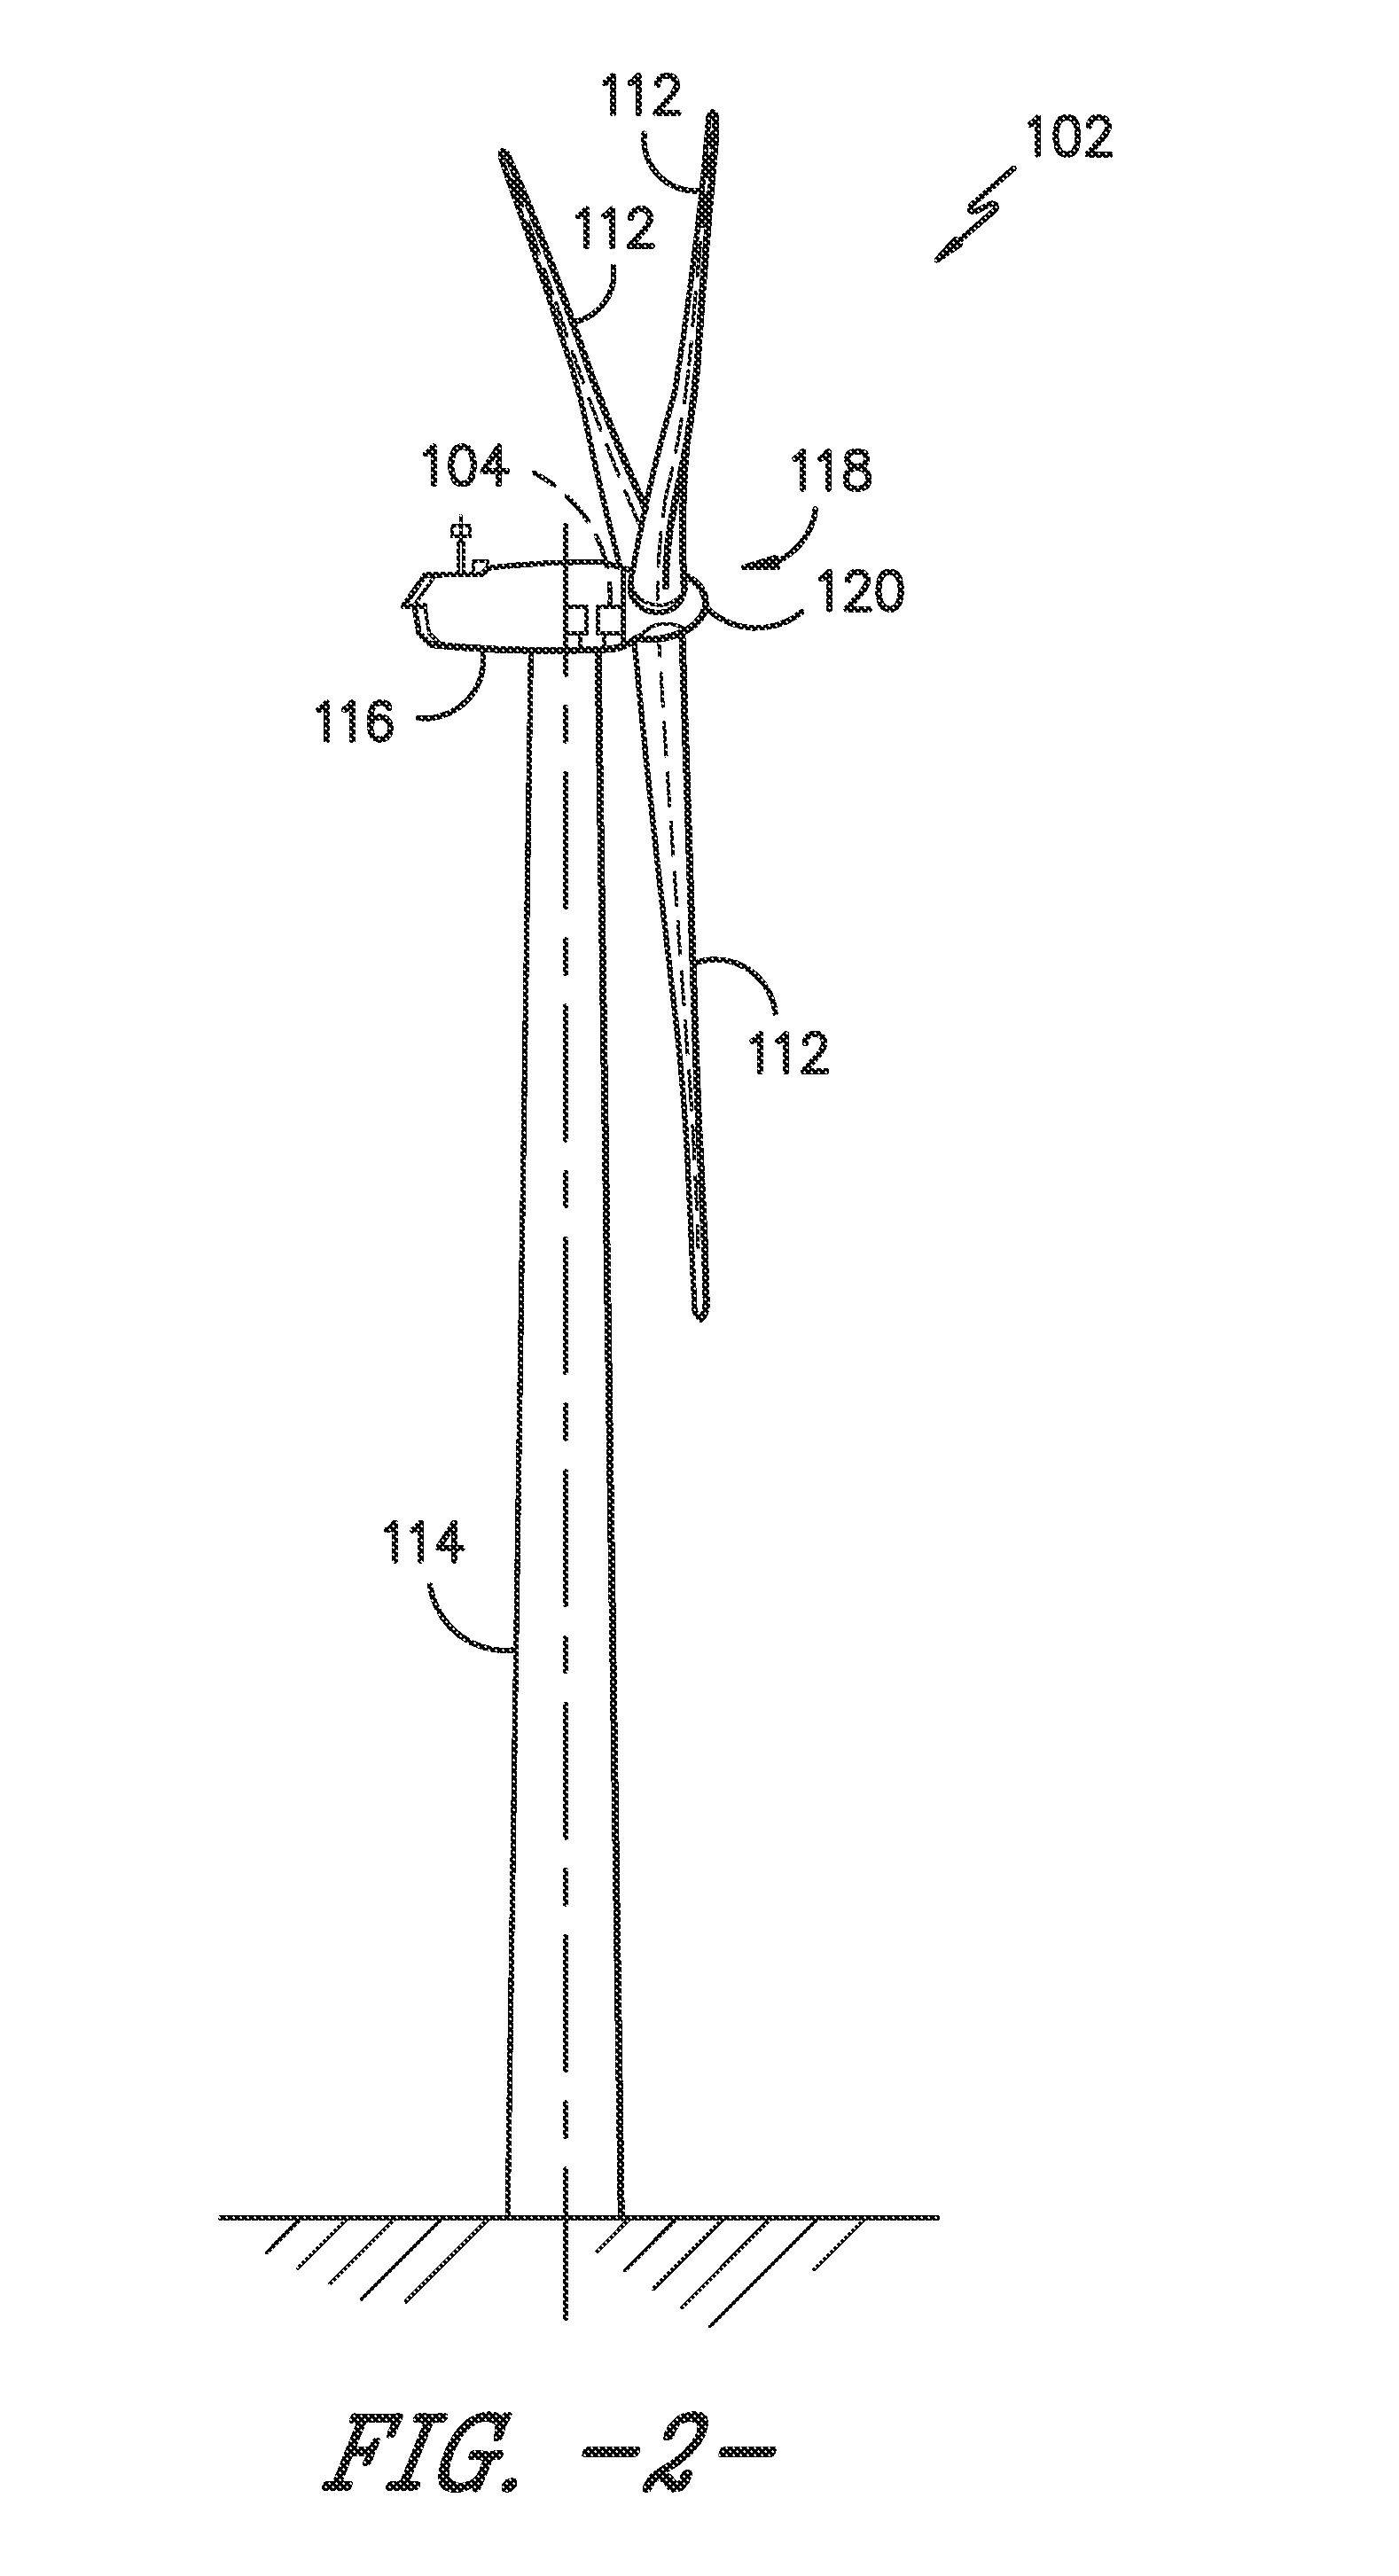 Systems and methods for validating wind farm performance measurements